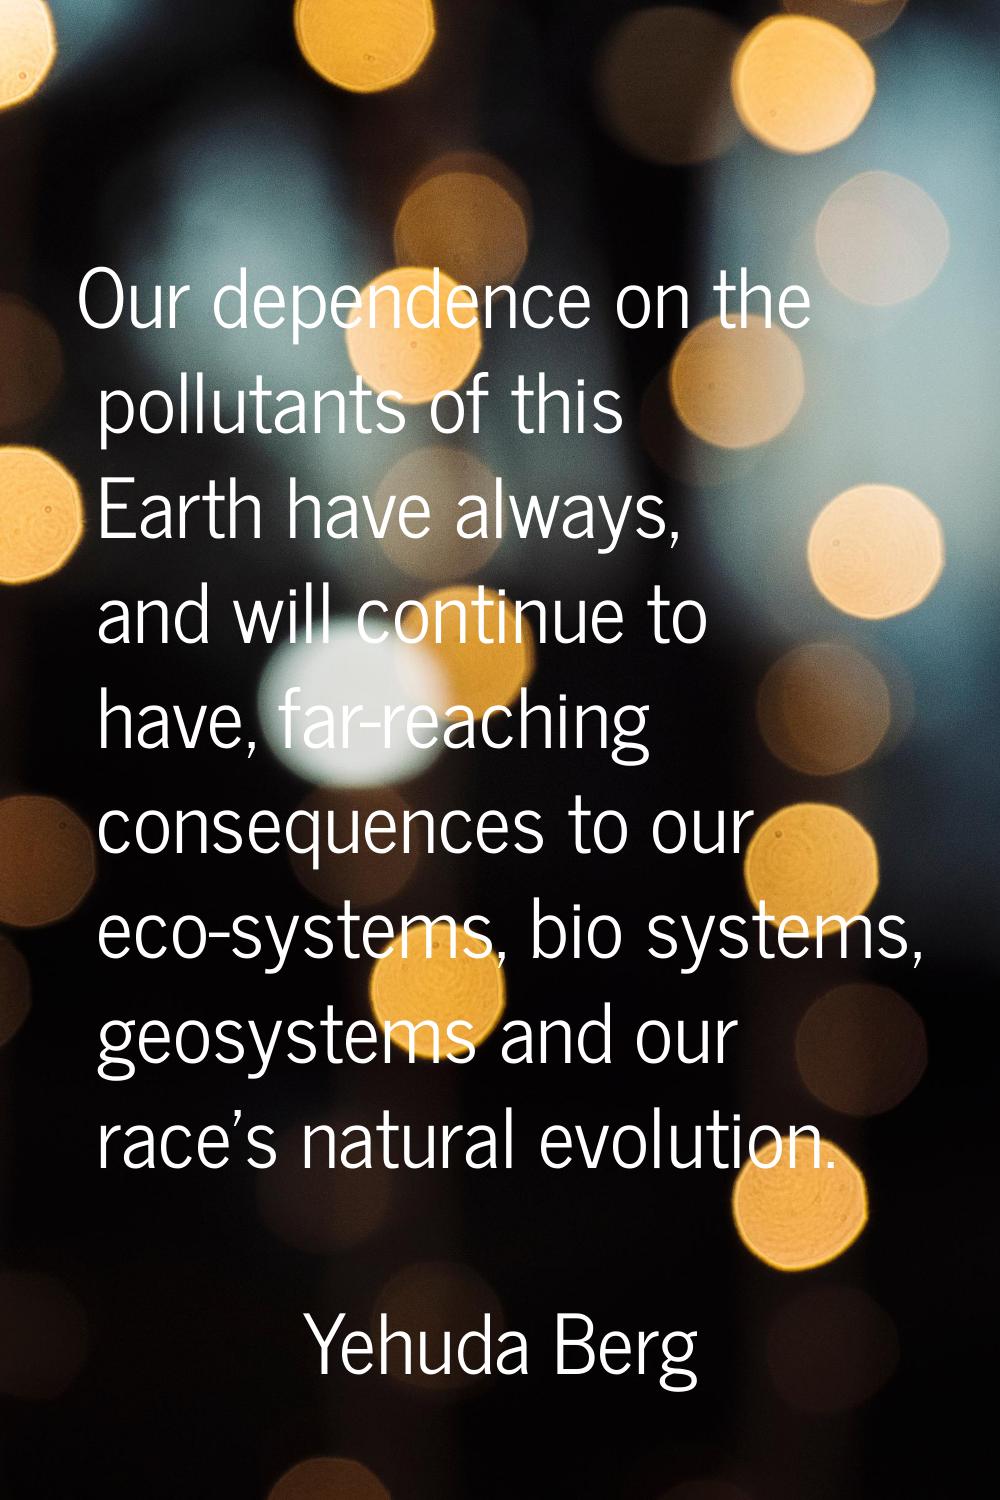 Our dependence on the pollutants of this Earth have always, and will continue to have, far-reaching